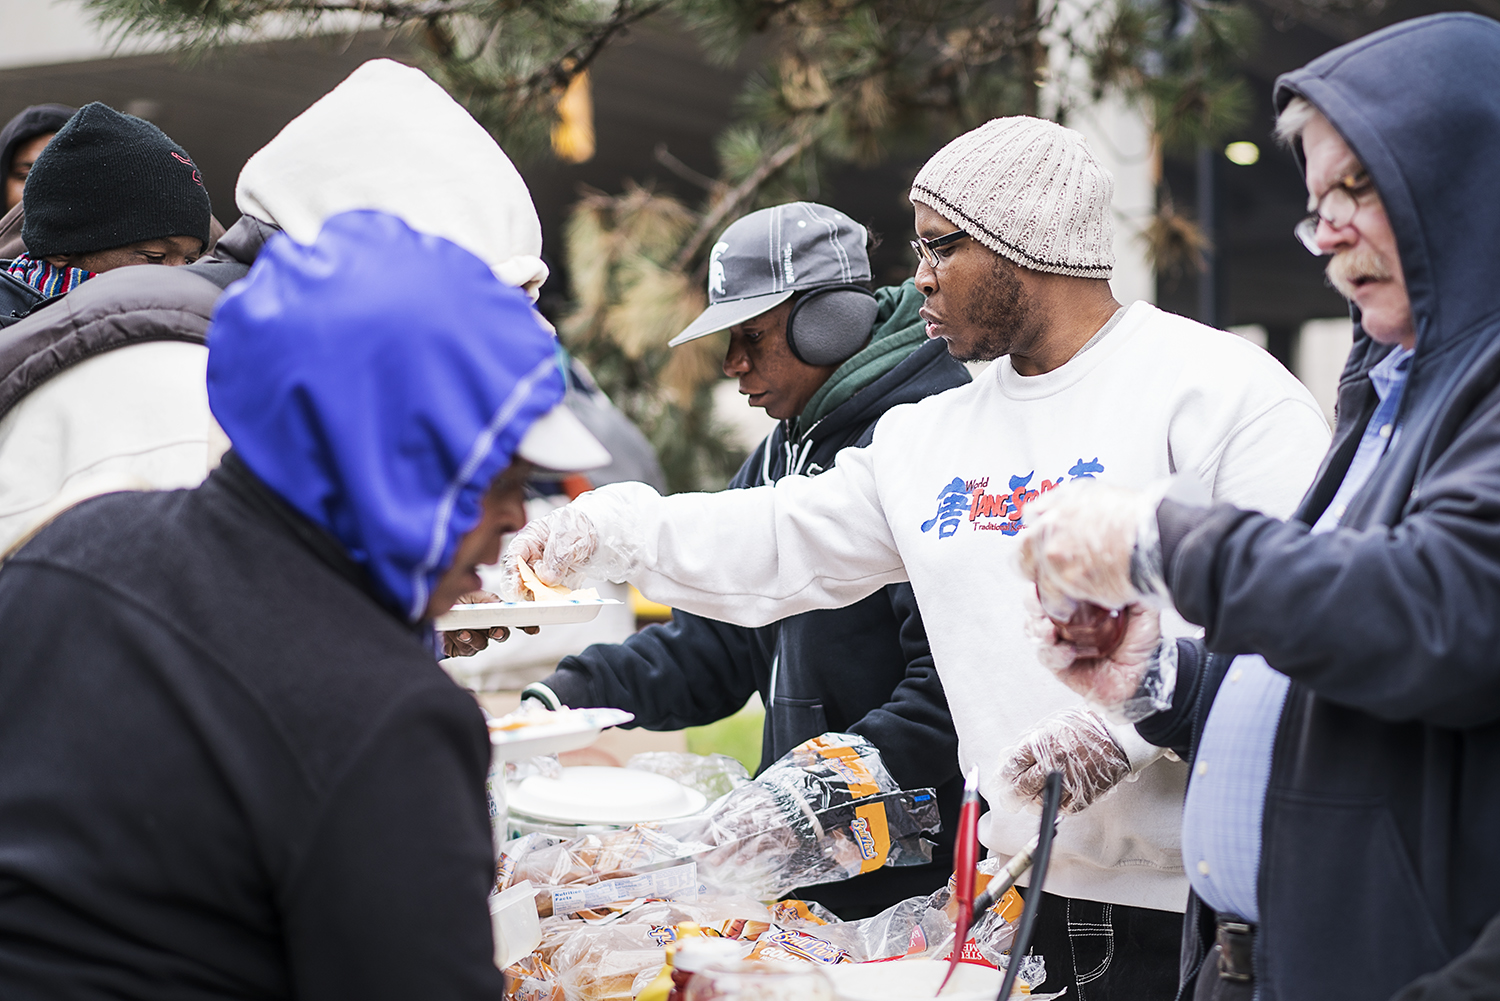 Burton resident Paul C. Owens, 31, (center) serves up some food at the Flint Community Cookout at the Riverbank Park. Owens, a volunteer for 4 years, uses the cookouts as an opportunity to "do the Lord's work" and to meet people, overcoming his self-